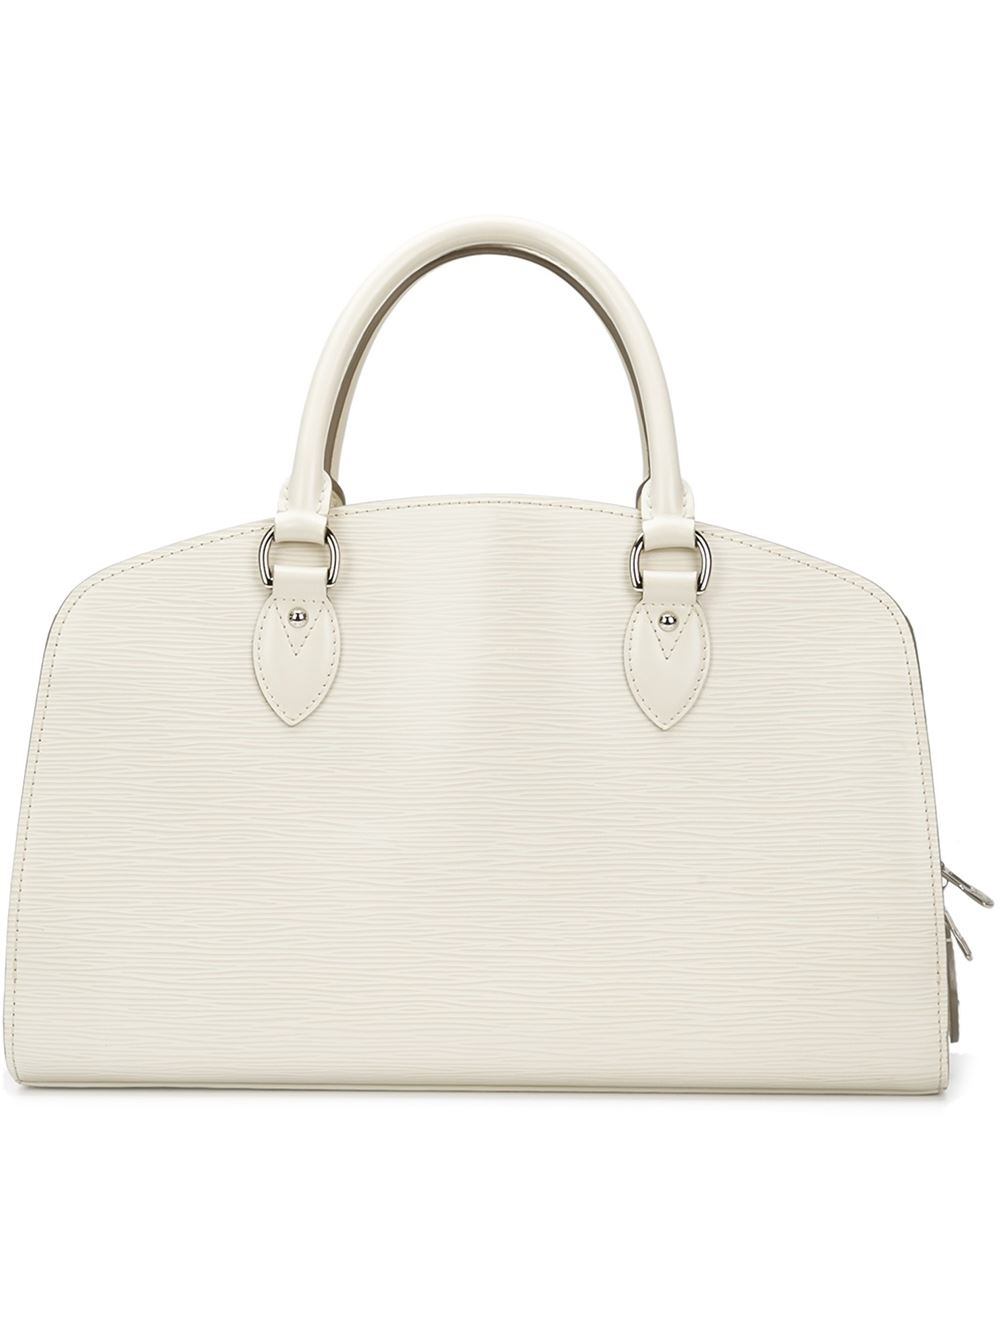 Louis Vuitton Leather Bowling Style Tote Bag in White - Lyst